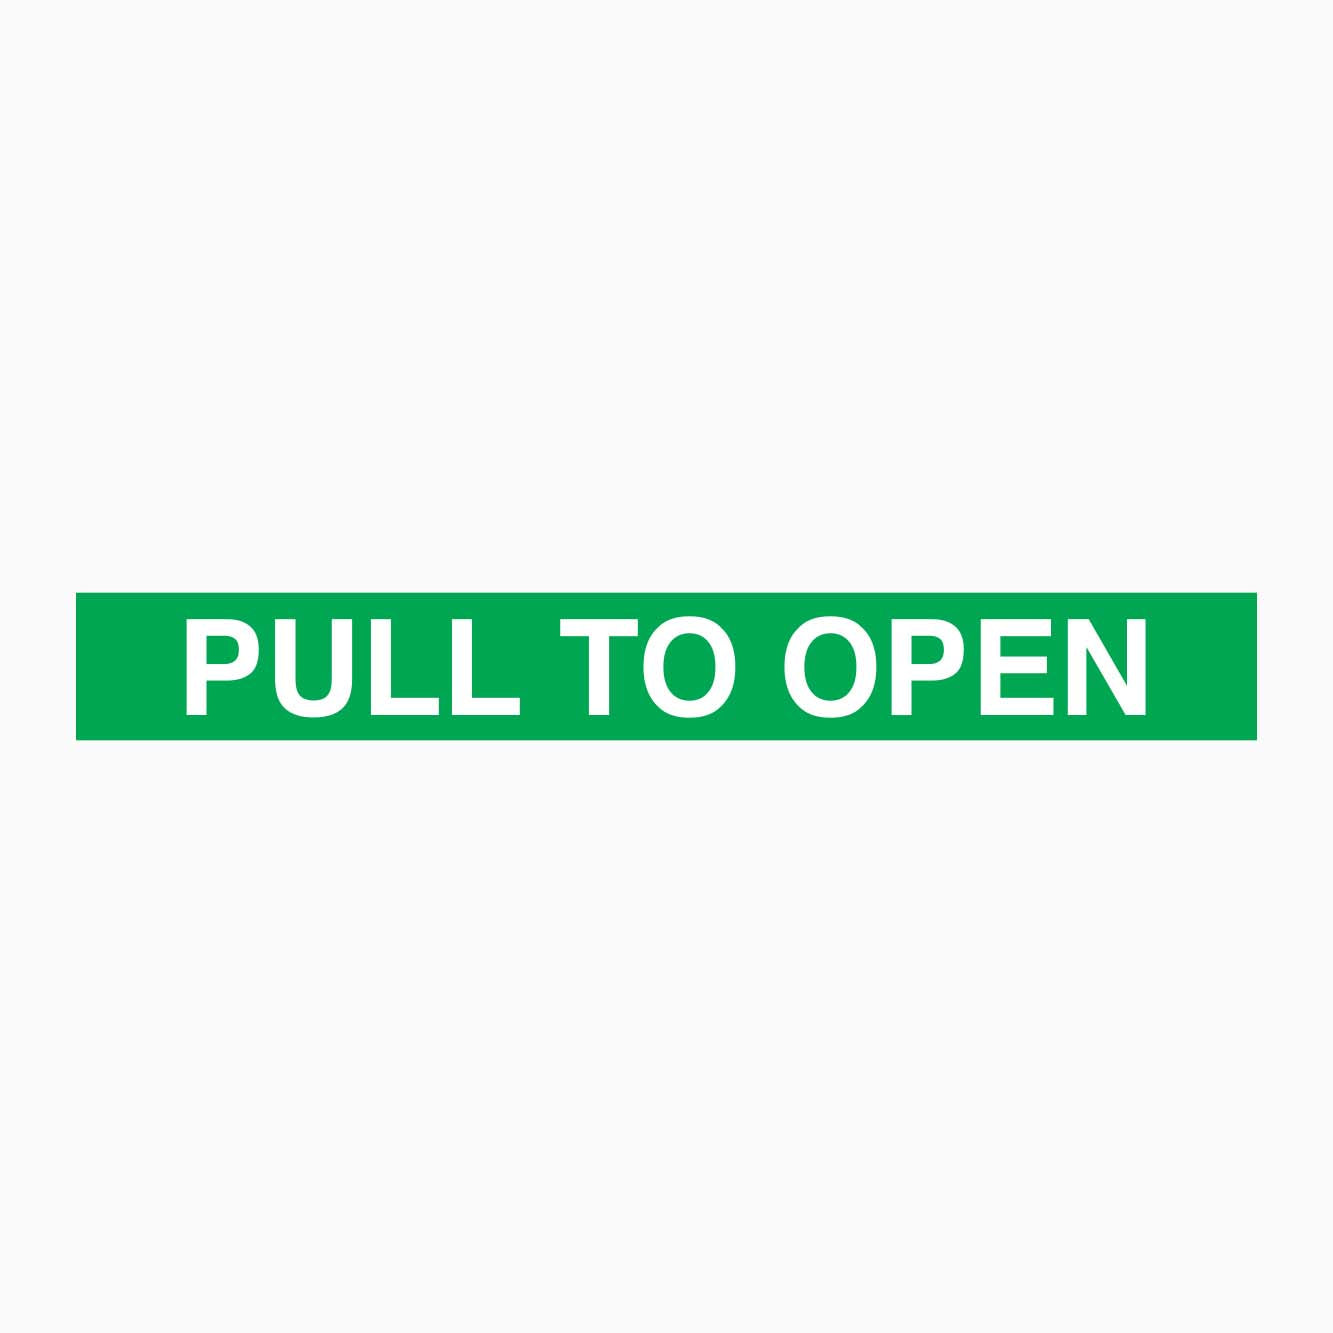 PULL TO OPEN SIGN - GET SIGNS - GREEN BACKGROUND